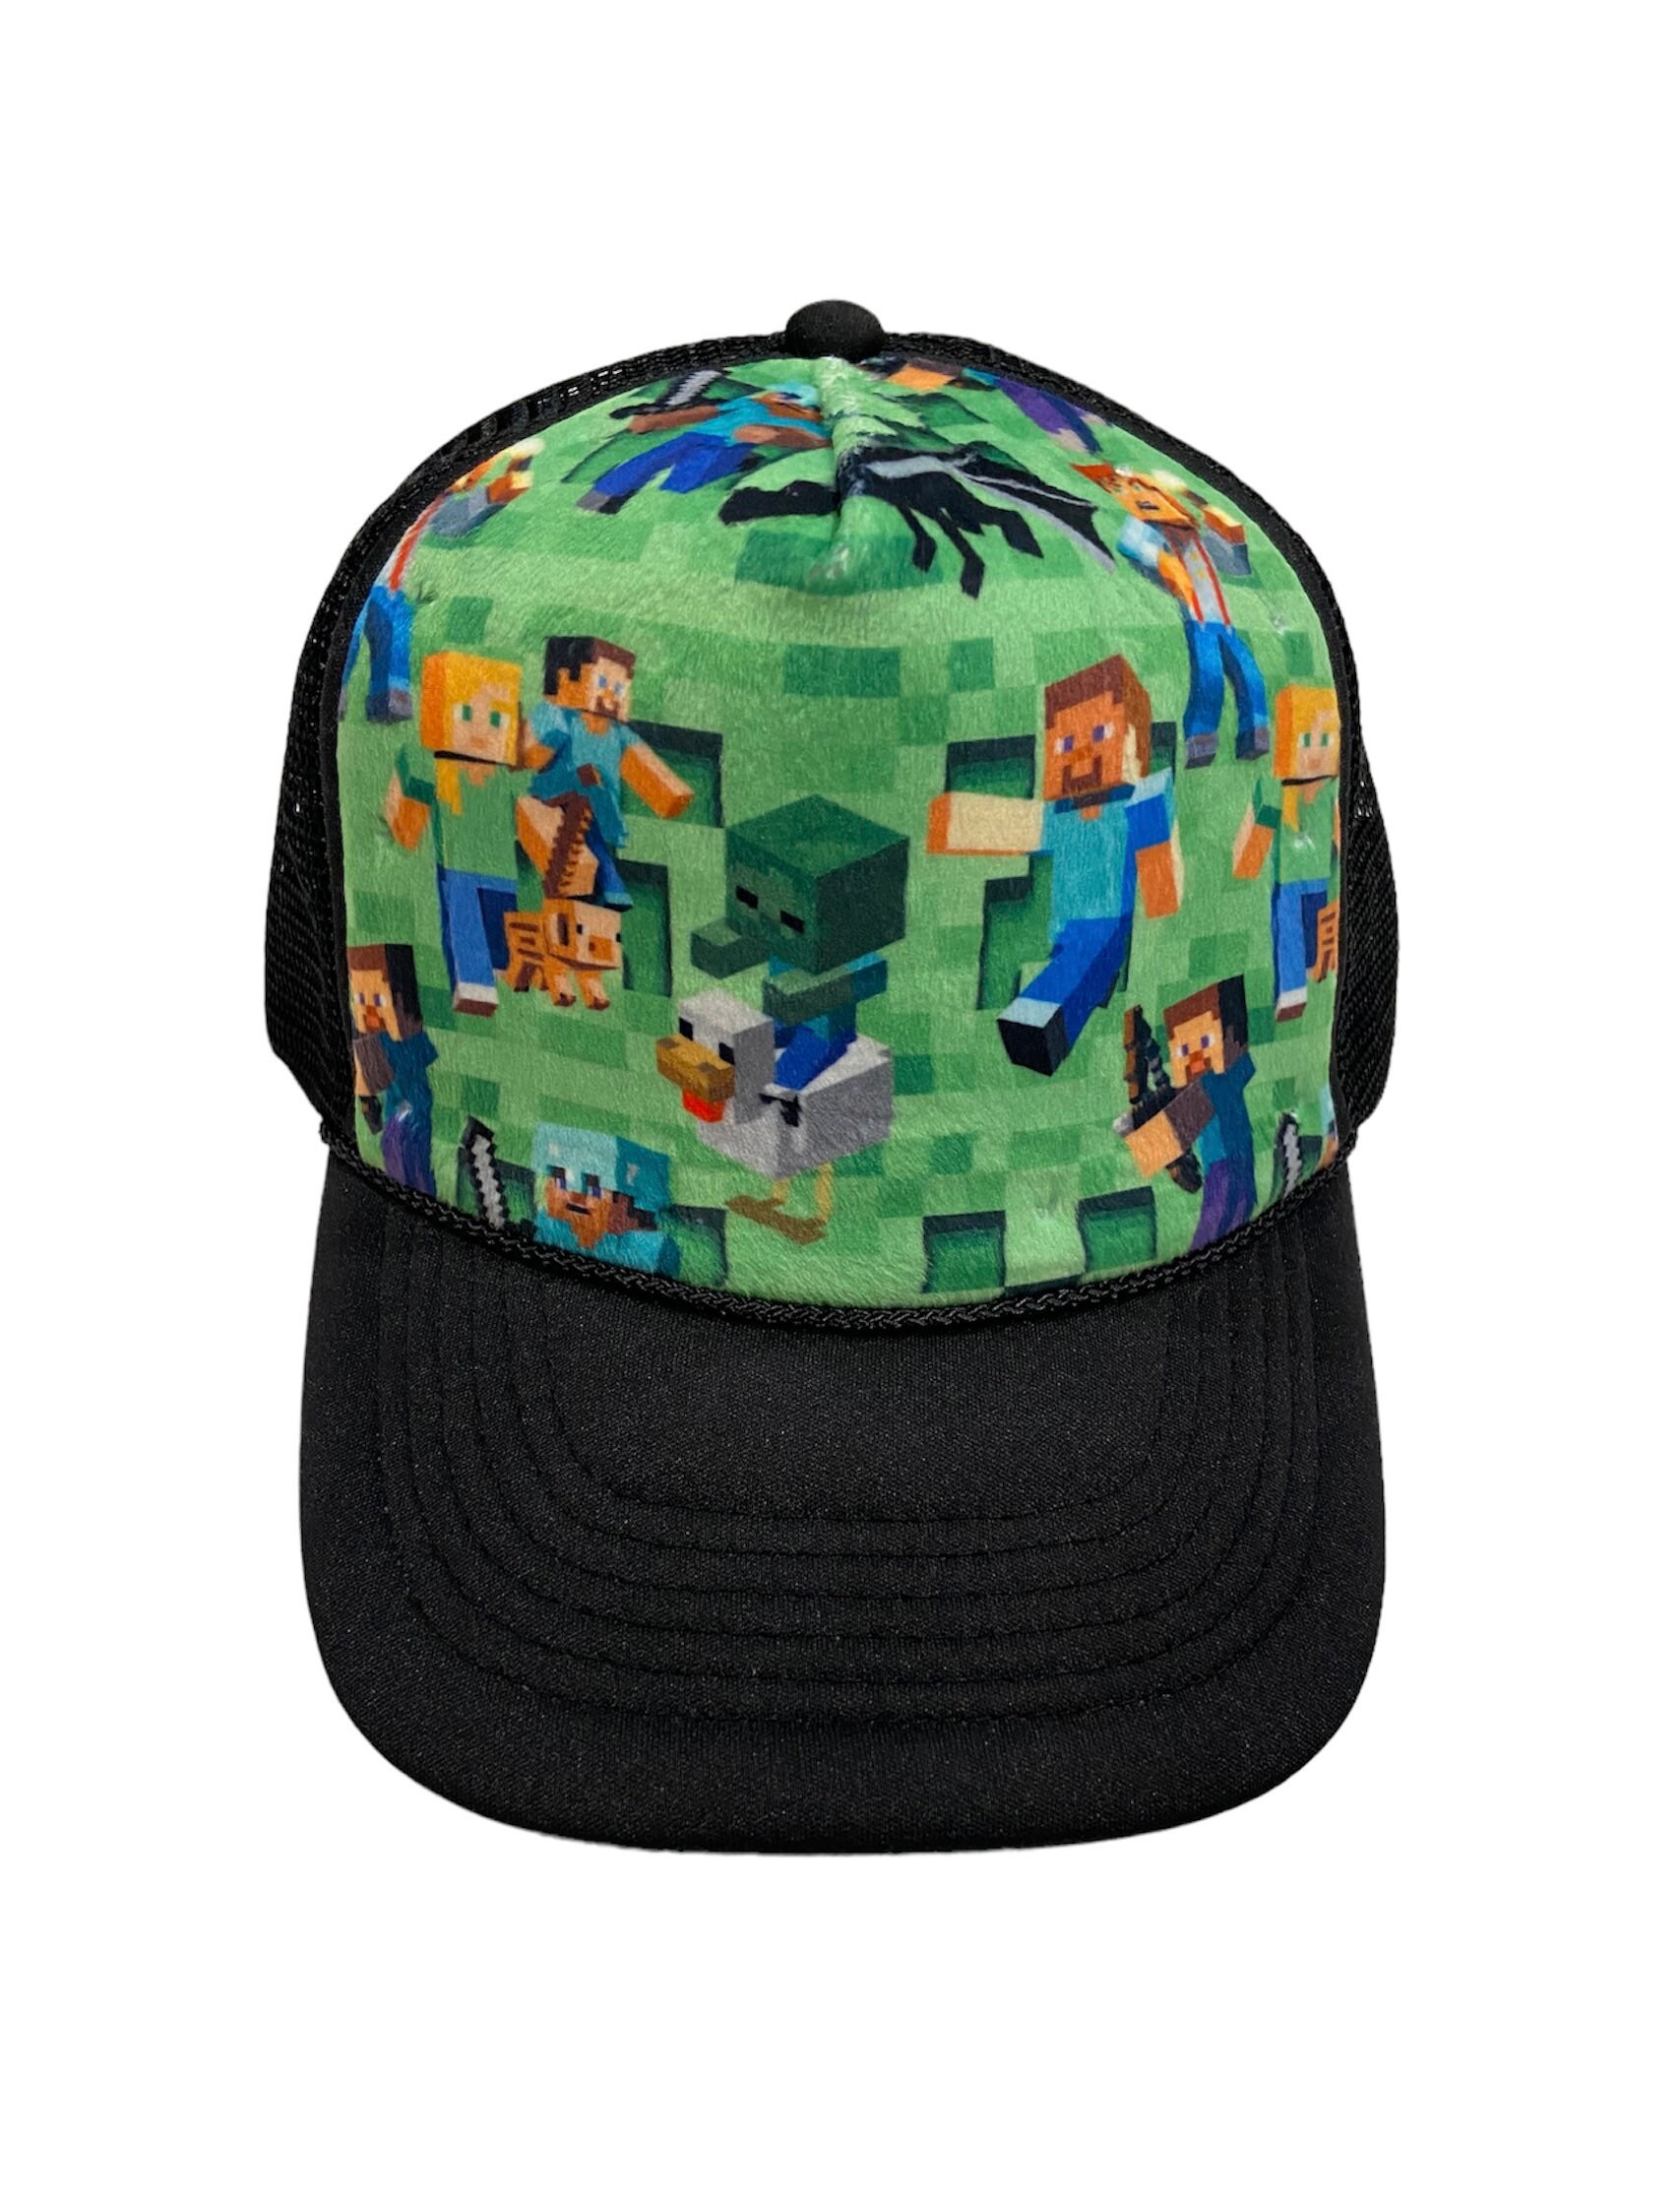 Playstation Trucker Hat for All Ages